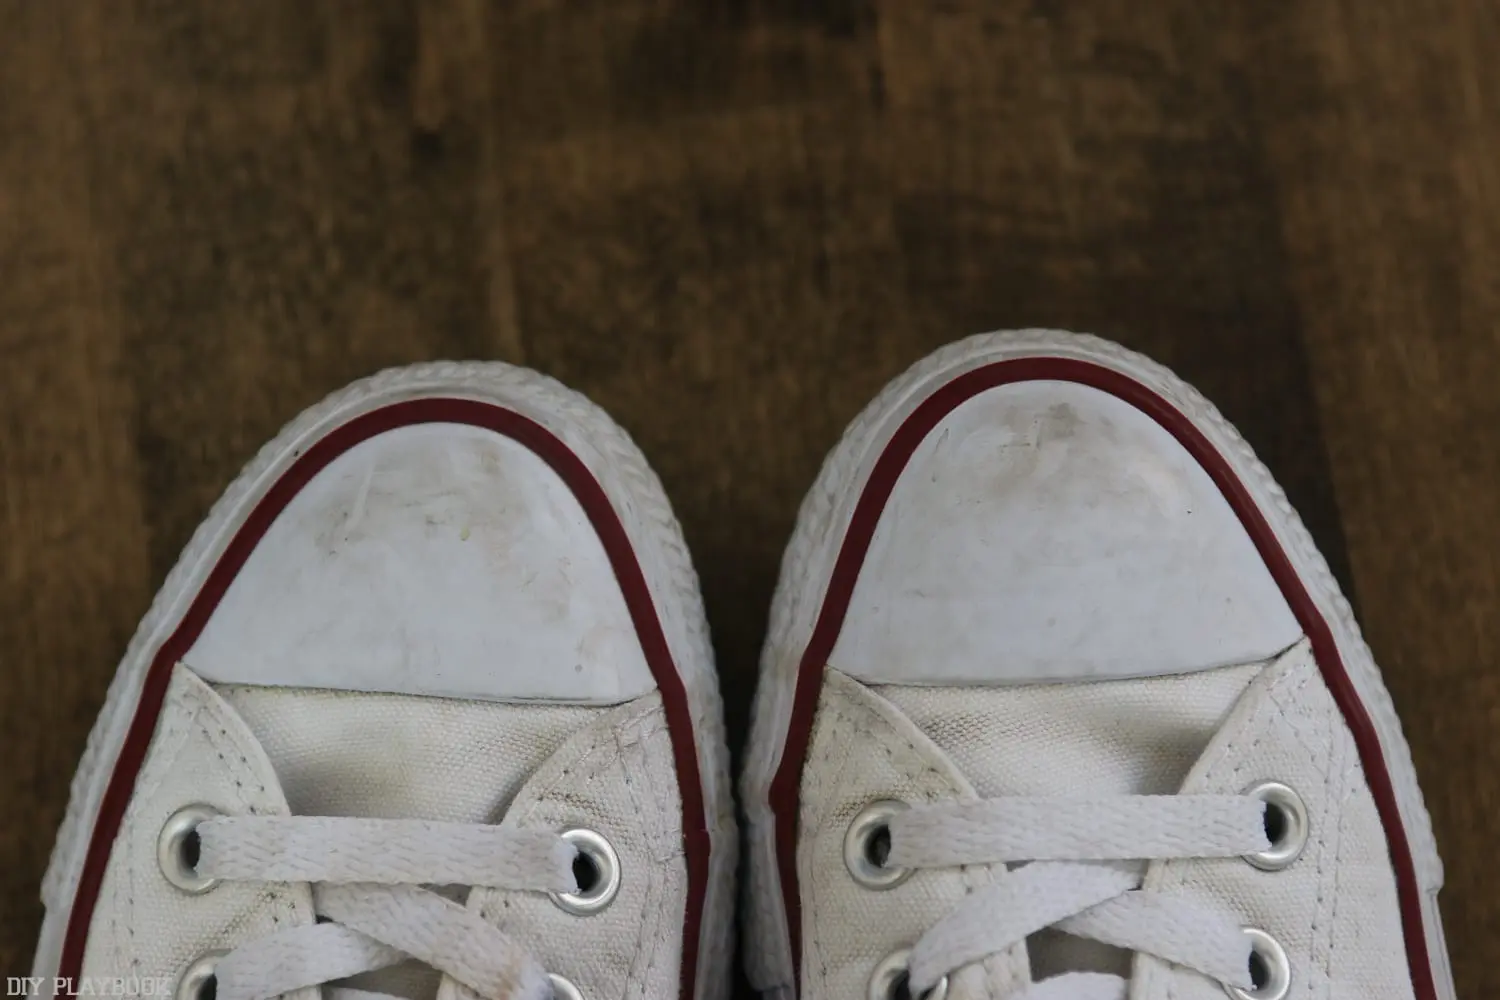 How to Clean Converse Gym Shoes | The DIY Playbook